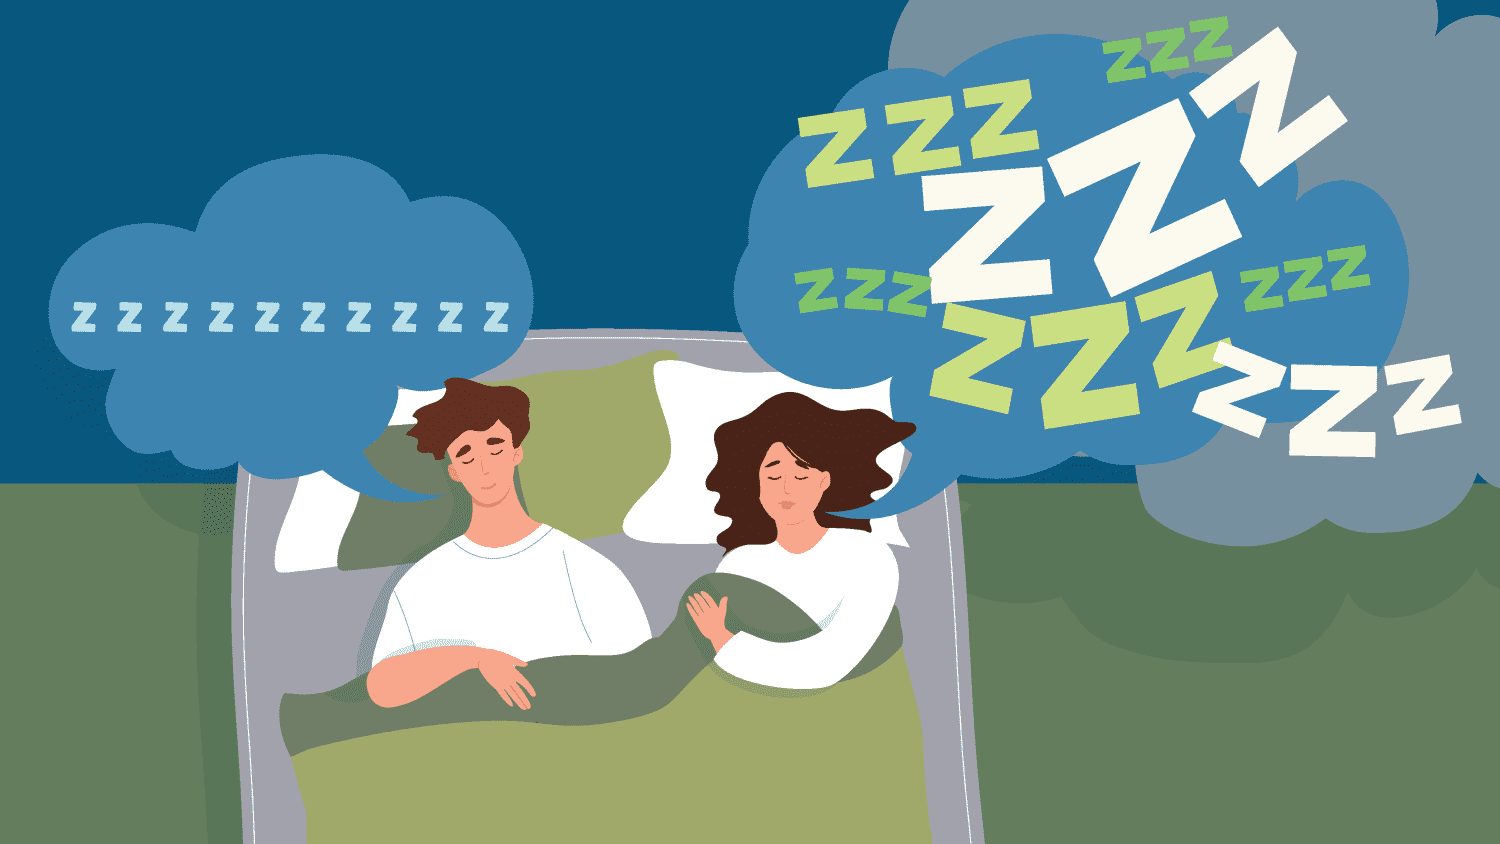 An illustration of a couple snoring in bed. Large speech bubbles with 'zzzzz' appear above each person's head.